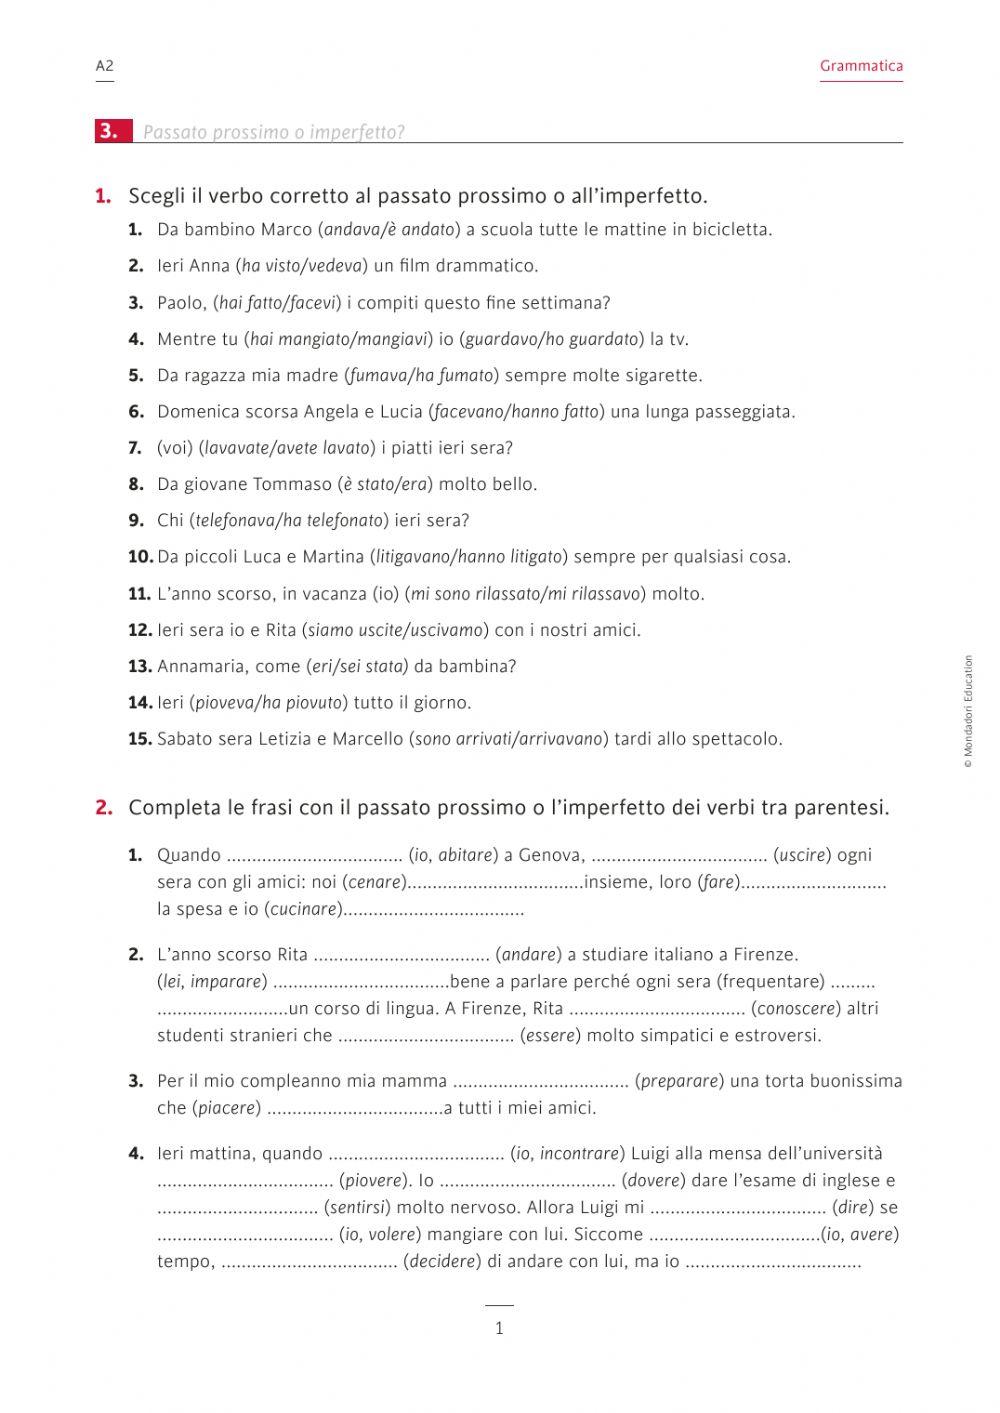 passato prossimo - imperfetto a2 online exercise for | Live Worksheets